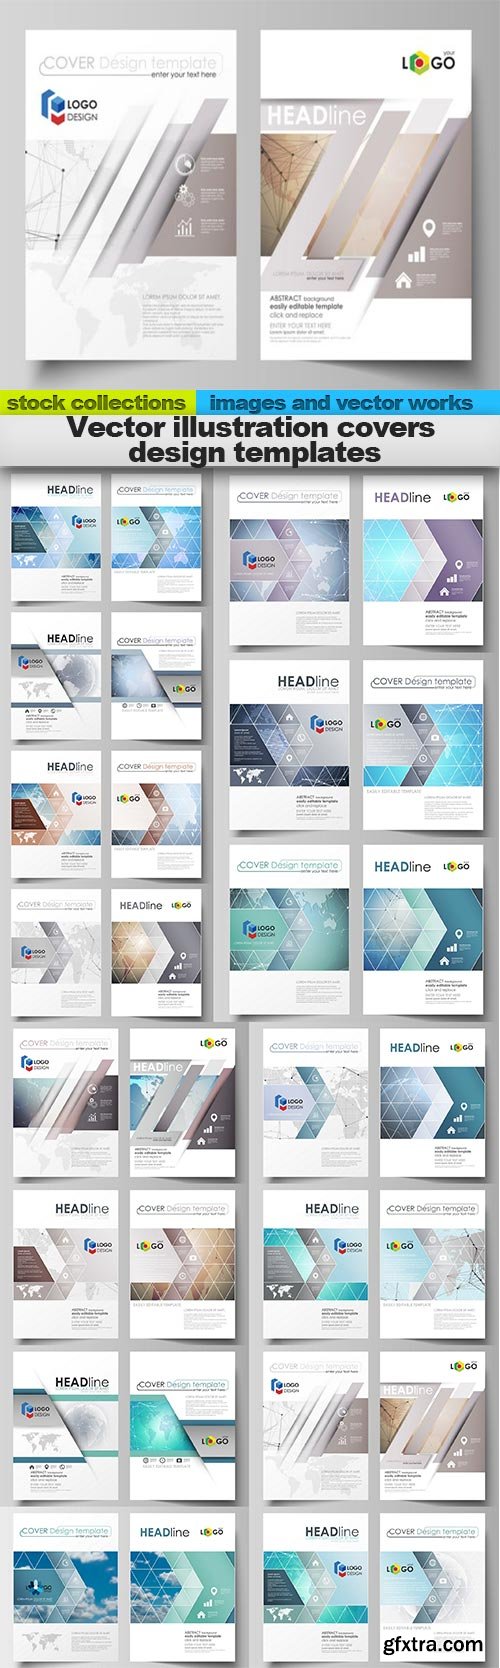 Vector illustration covers design templates, 15 X EPS